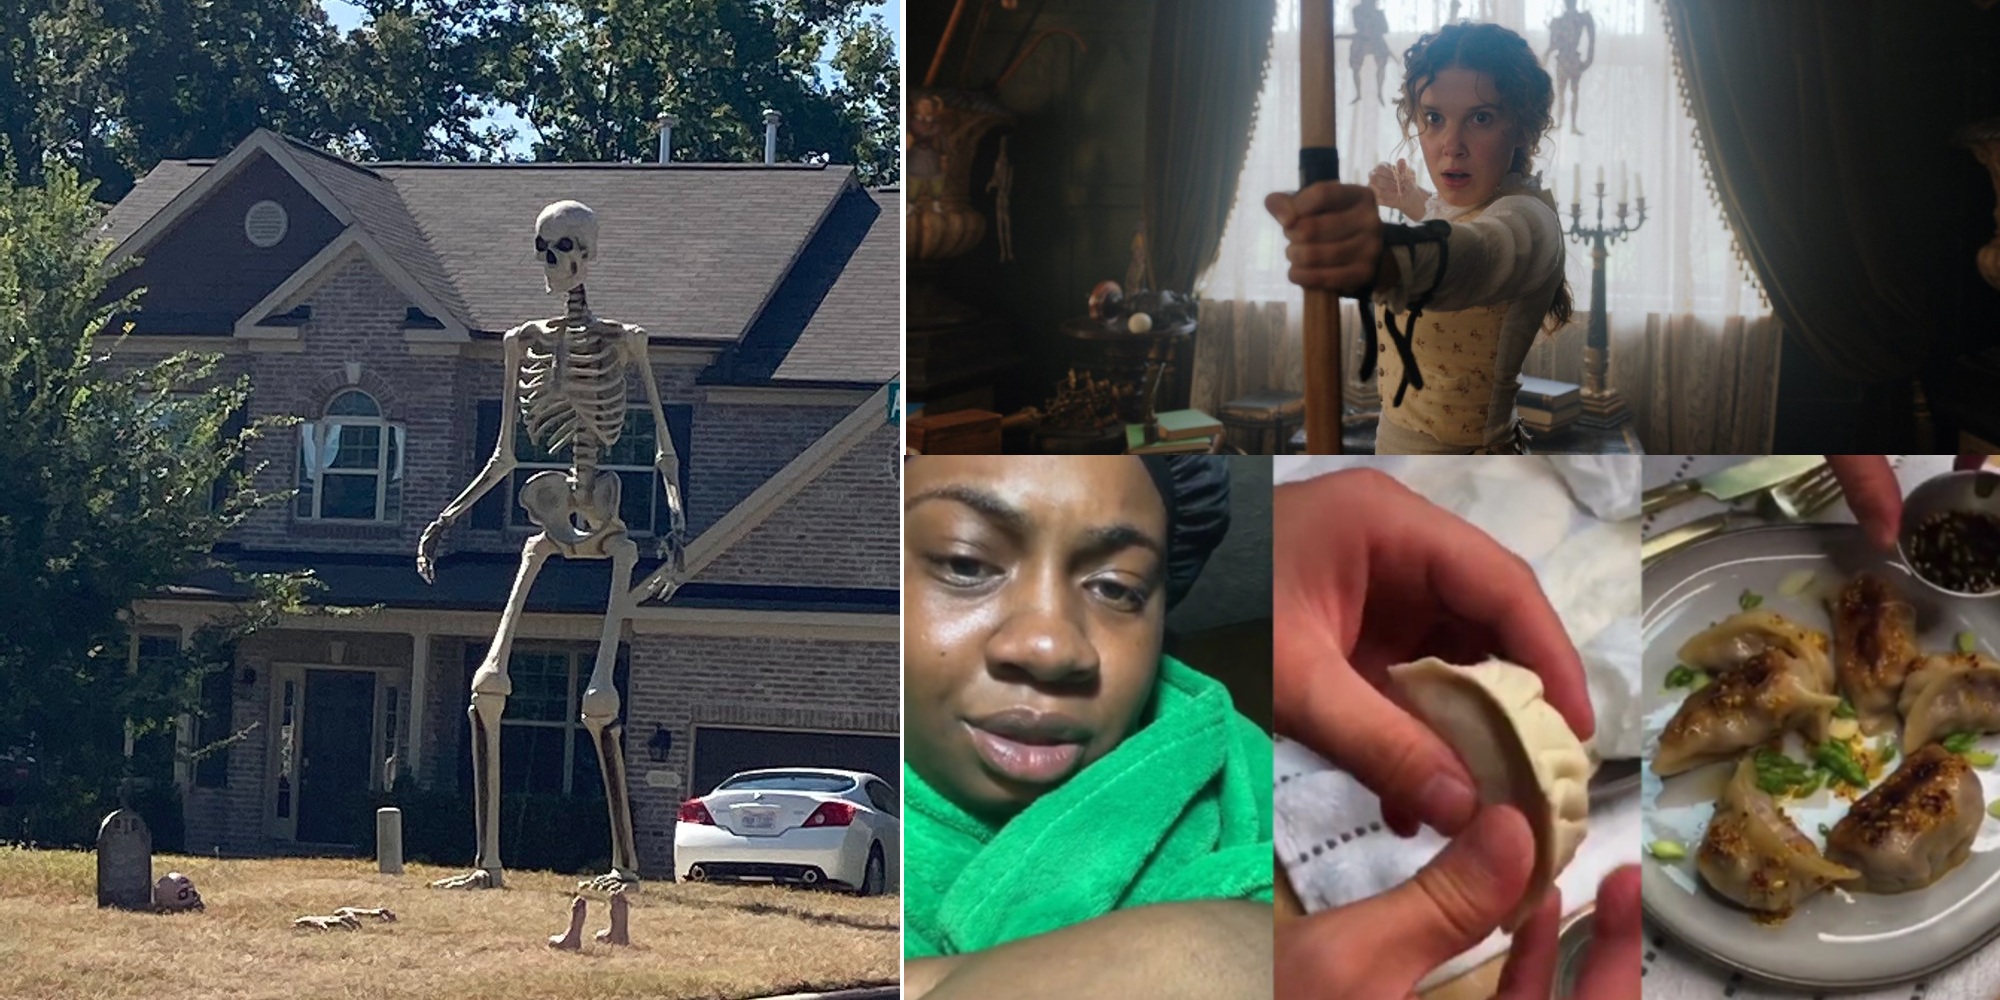 Home Depot Skeleton Goes On 'epic' Adventure In TikTok Video: 'This Is A Work Of Art'